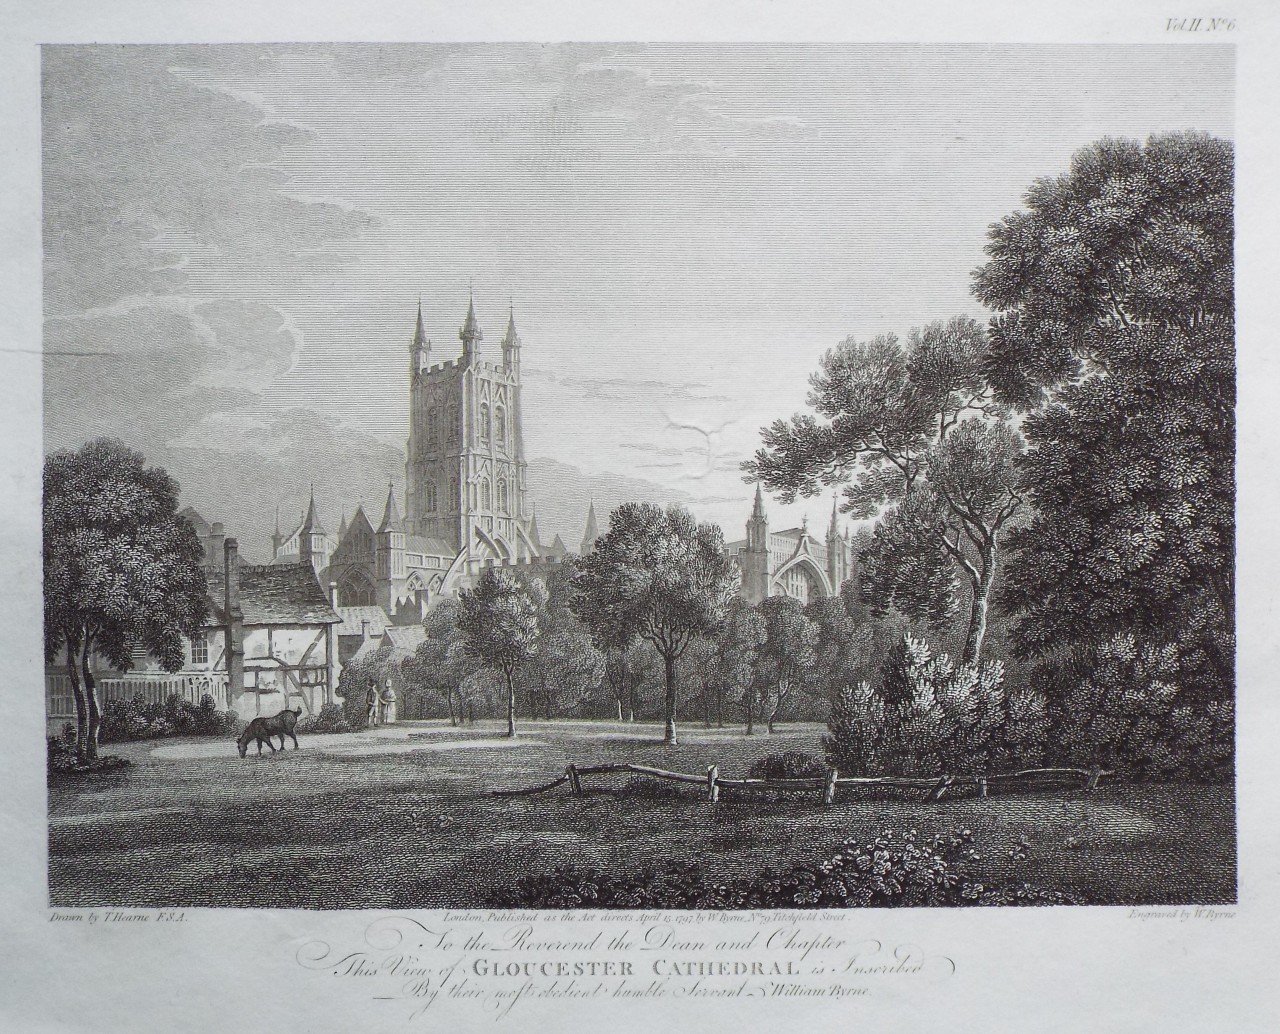 Lithograph - To the Reverand Dean and Chapter, This View of Gloucester Cathedral is Insccribed By their most obedient humble William Byrne. - Byrne